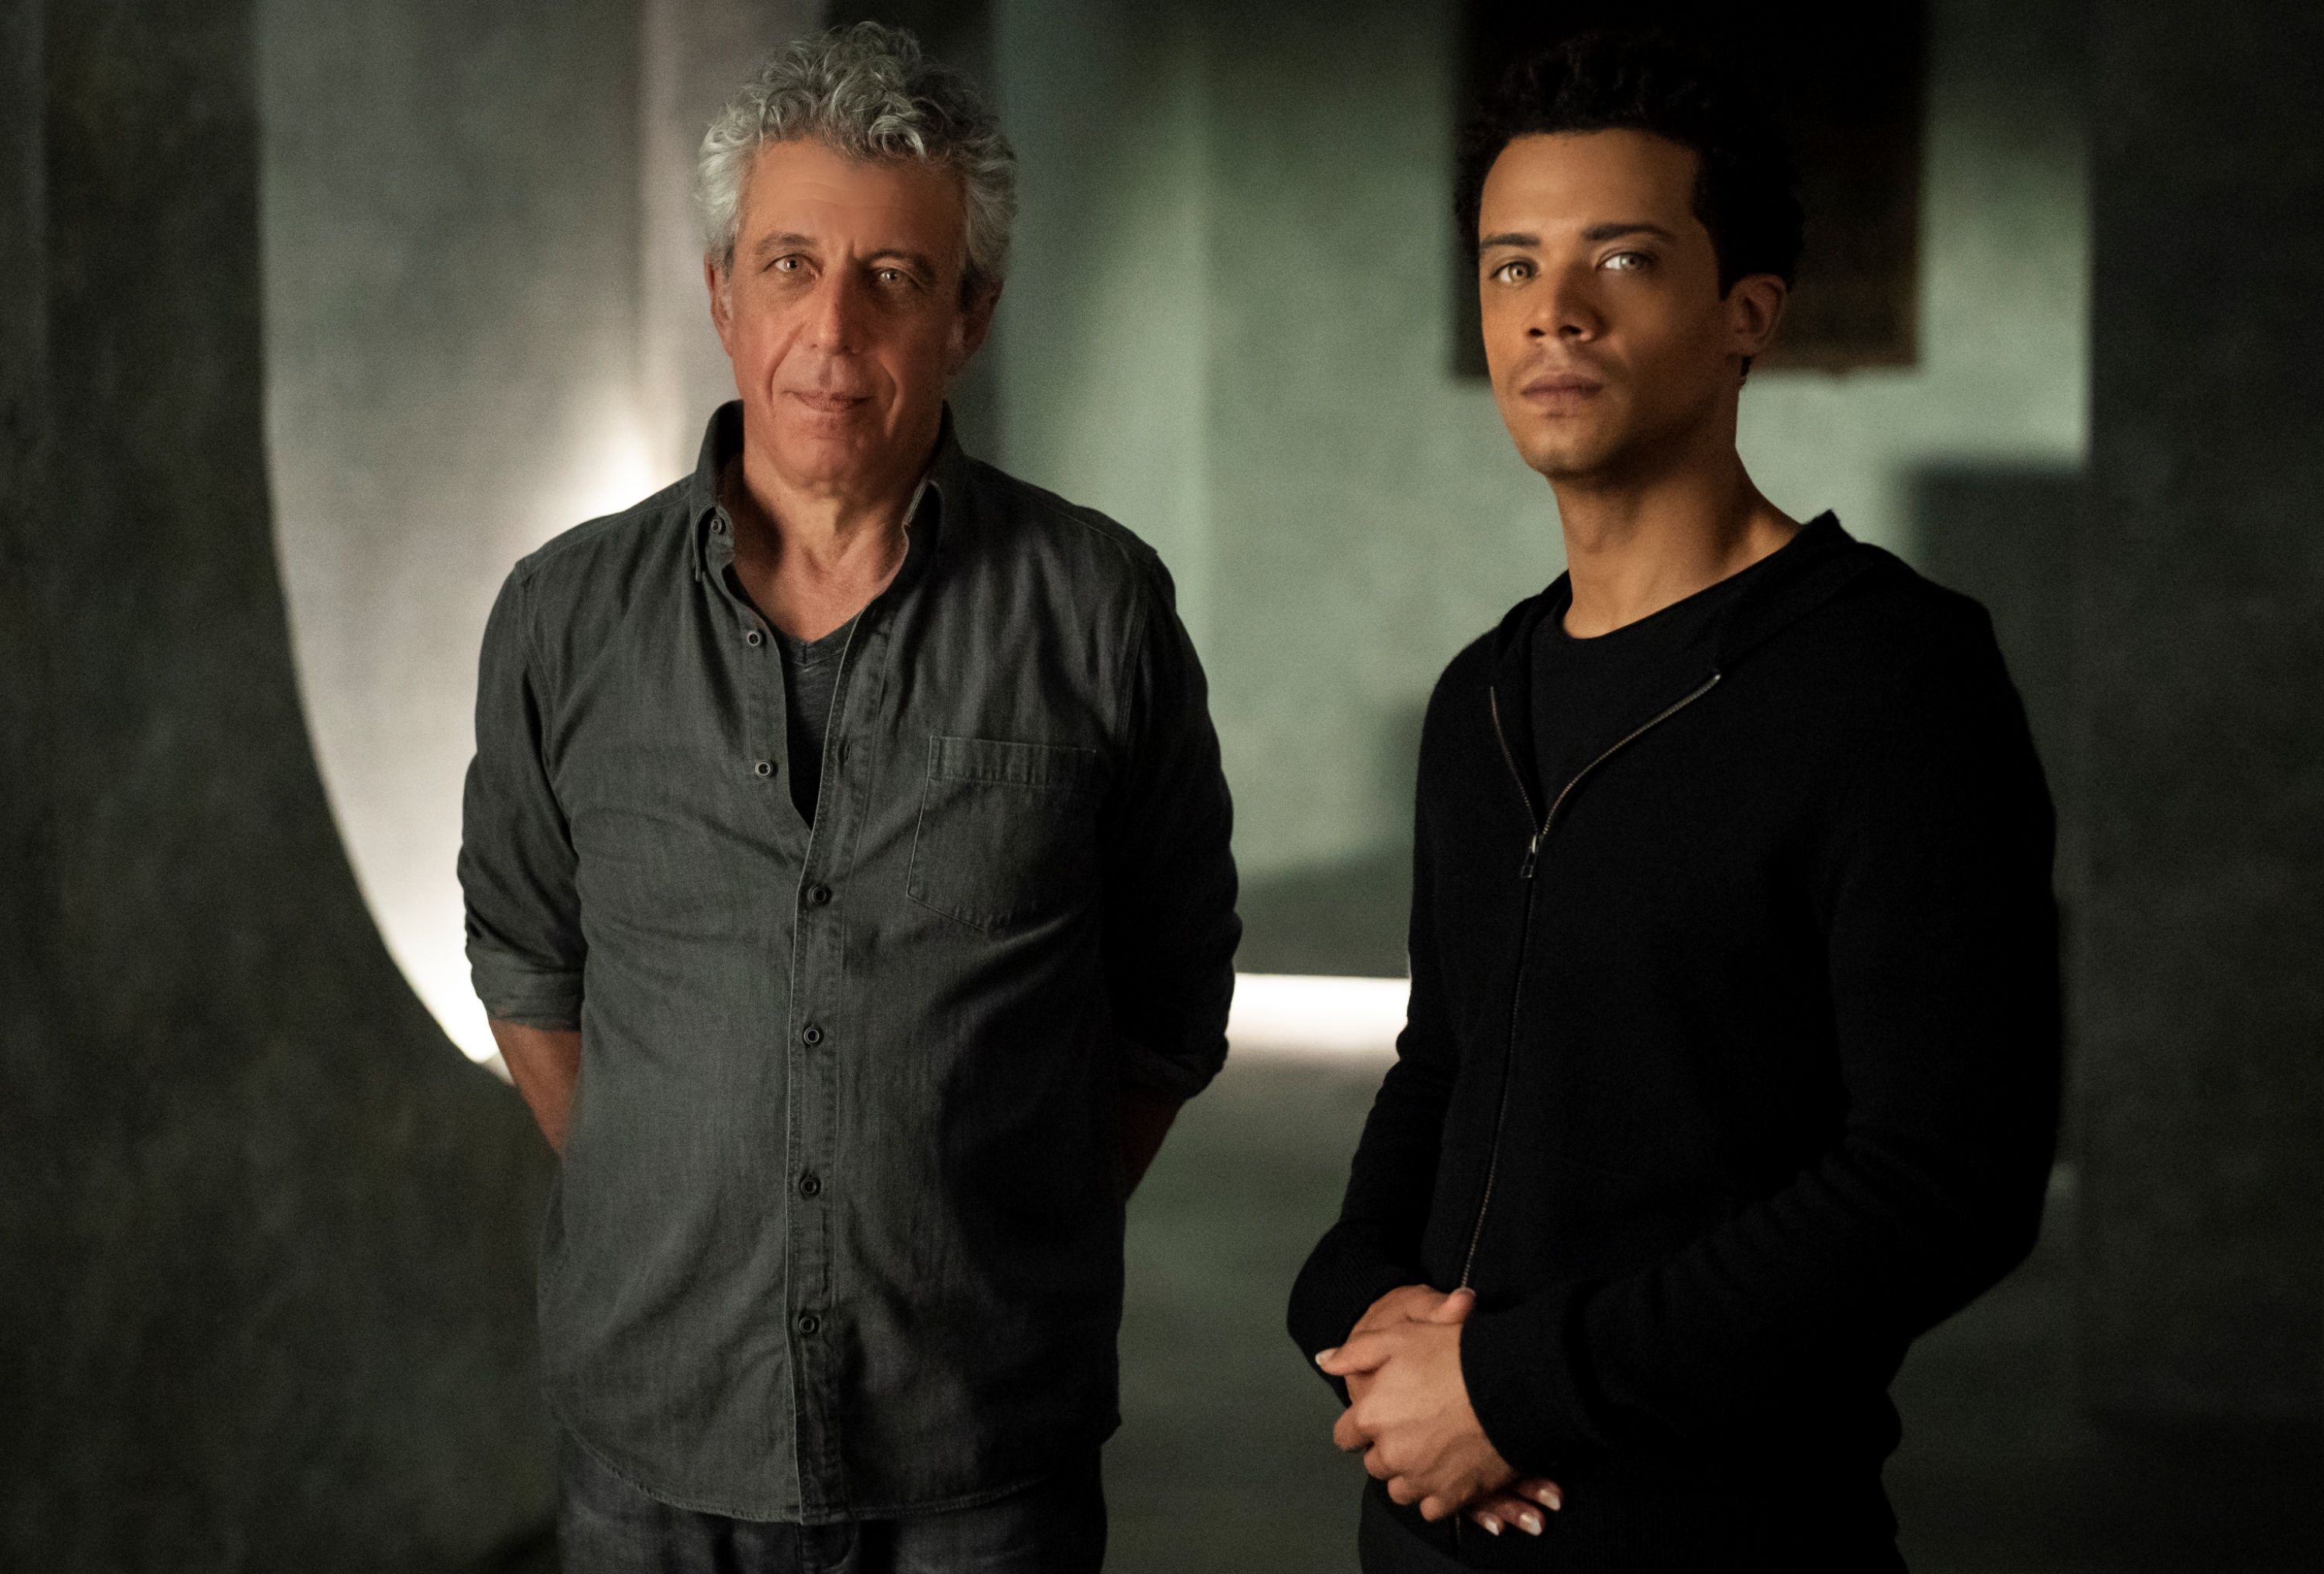 interview-with-the-vampire-eric-bogosian-jacob-anderson